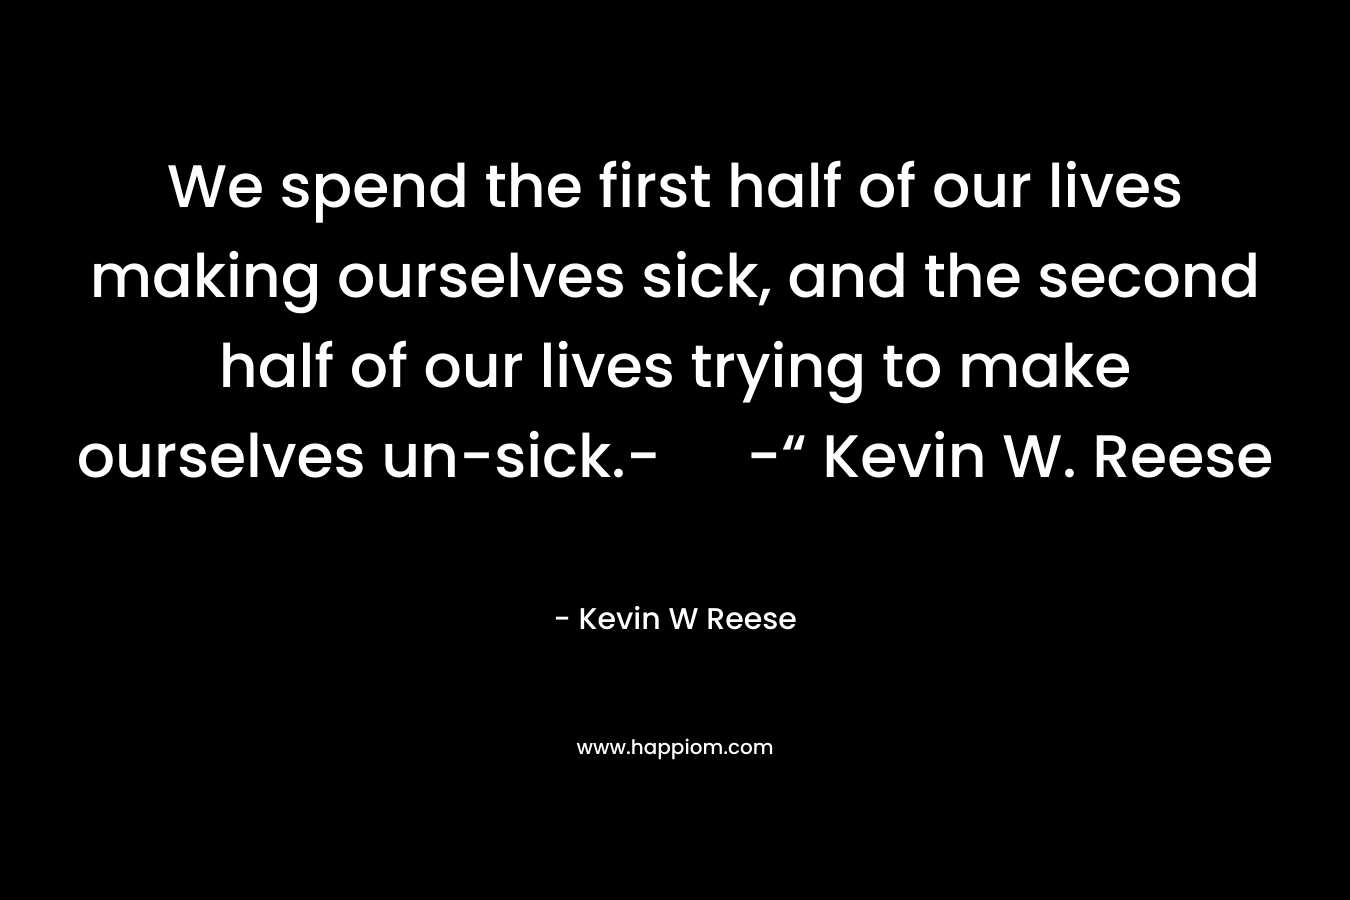 We spend the first half of our lives making ourselves sick, and the second half of our lives trying to make ourselves un-sick.- -“ Kevin W. Reese